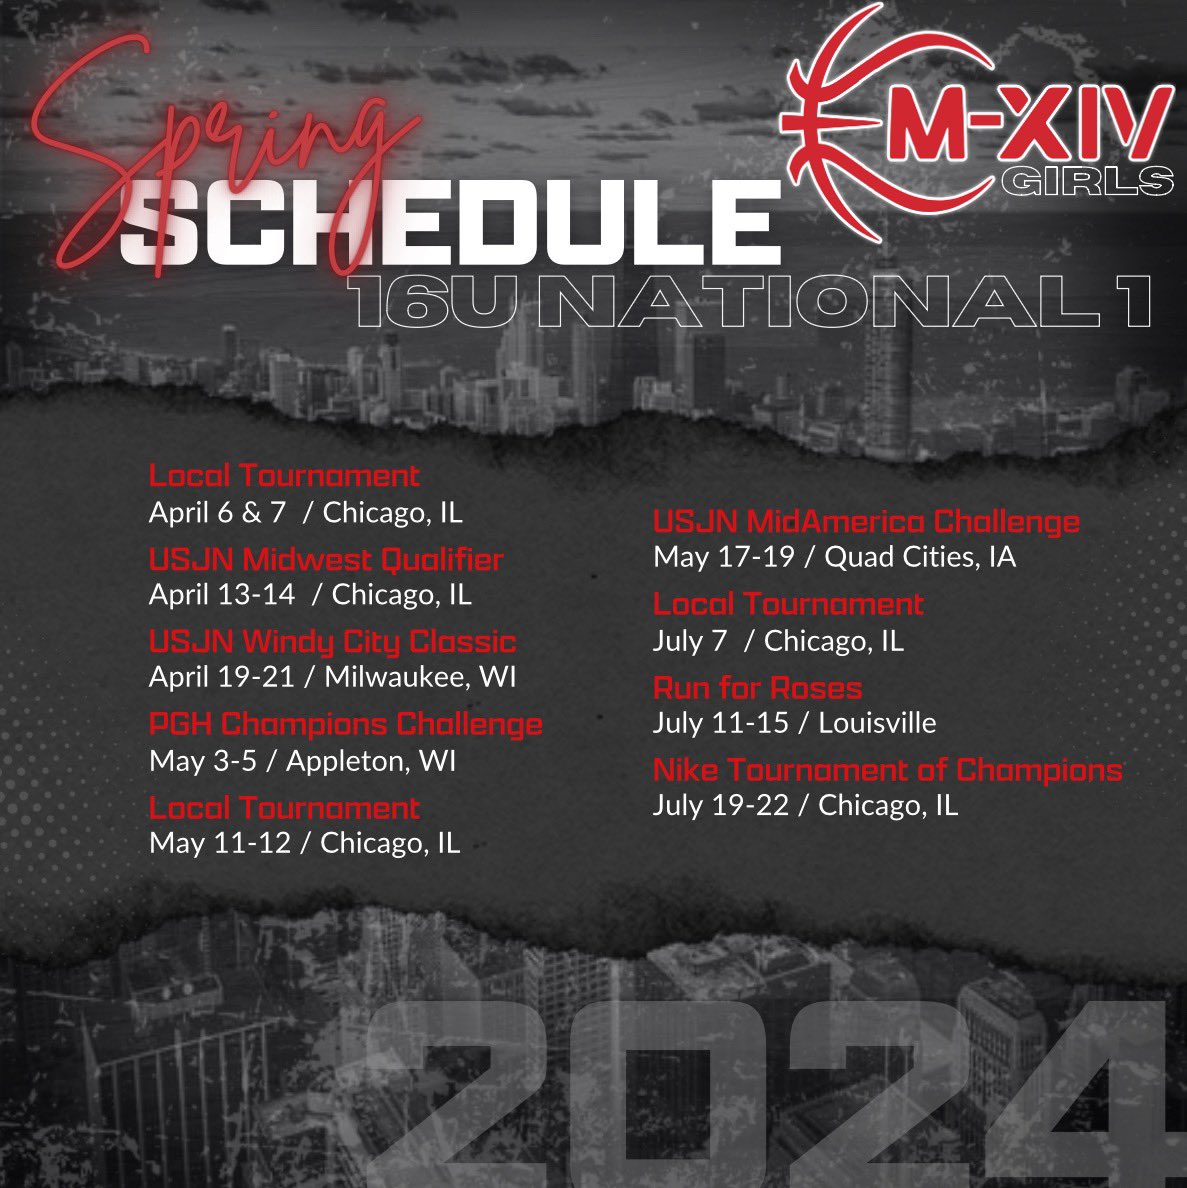 Super excited to start my AAU season with my team this weekend!! Here is my schedule for the season: